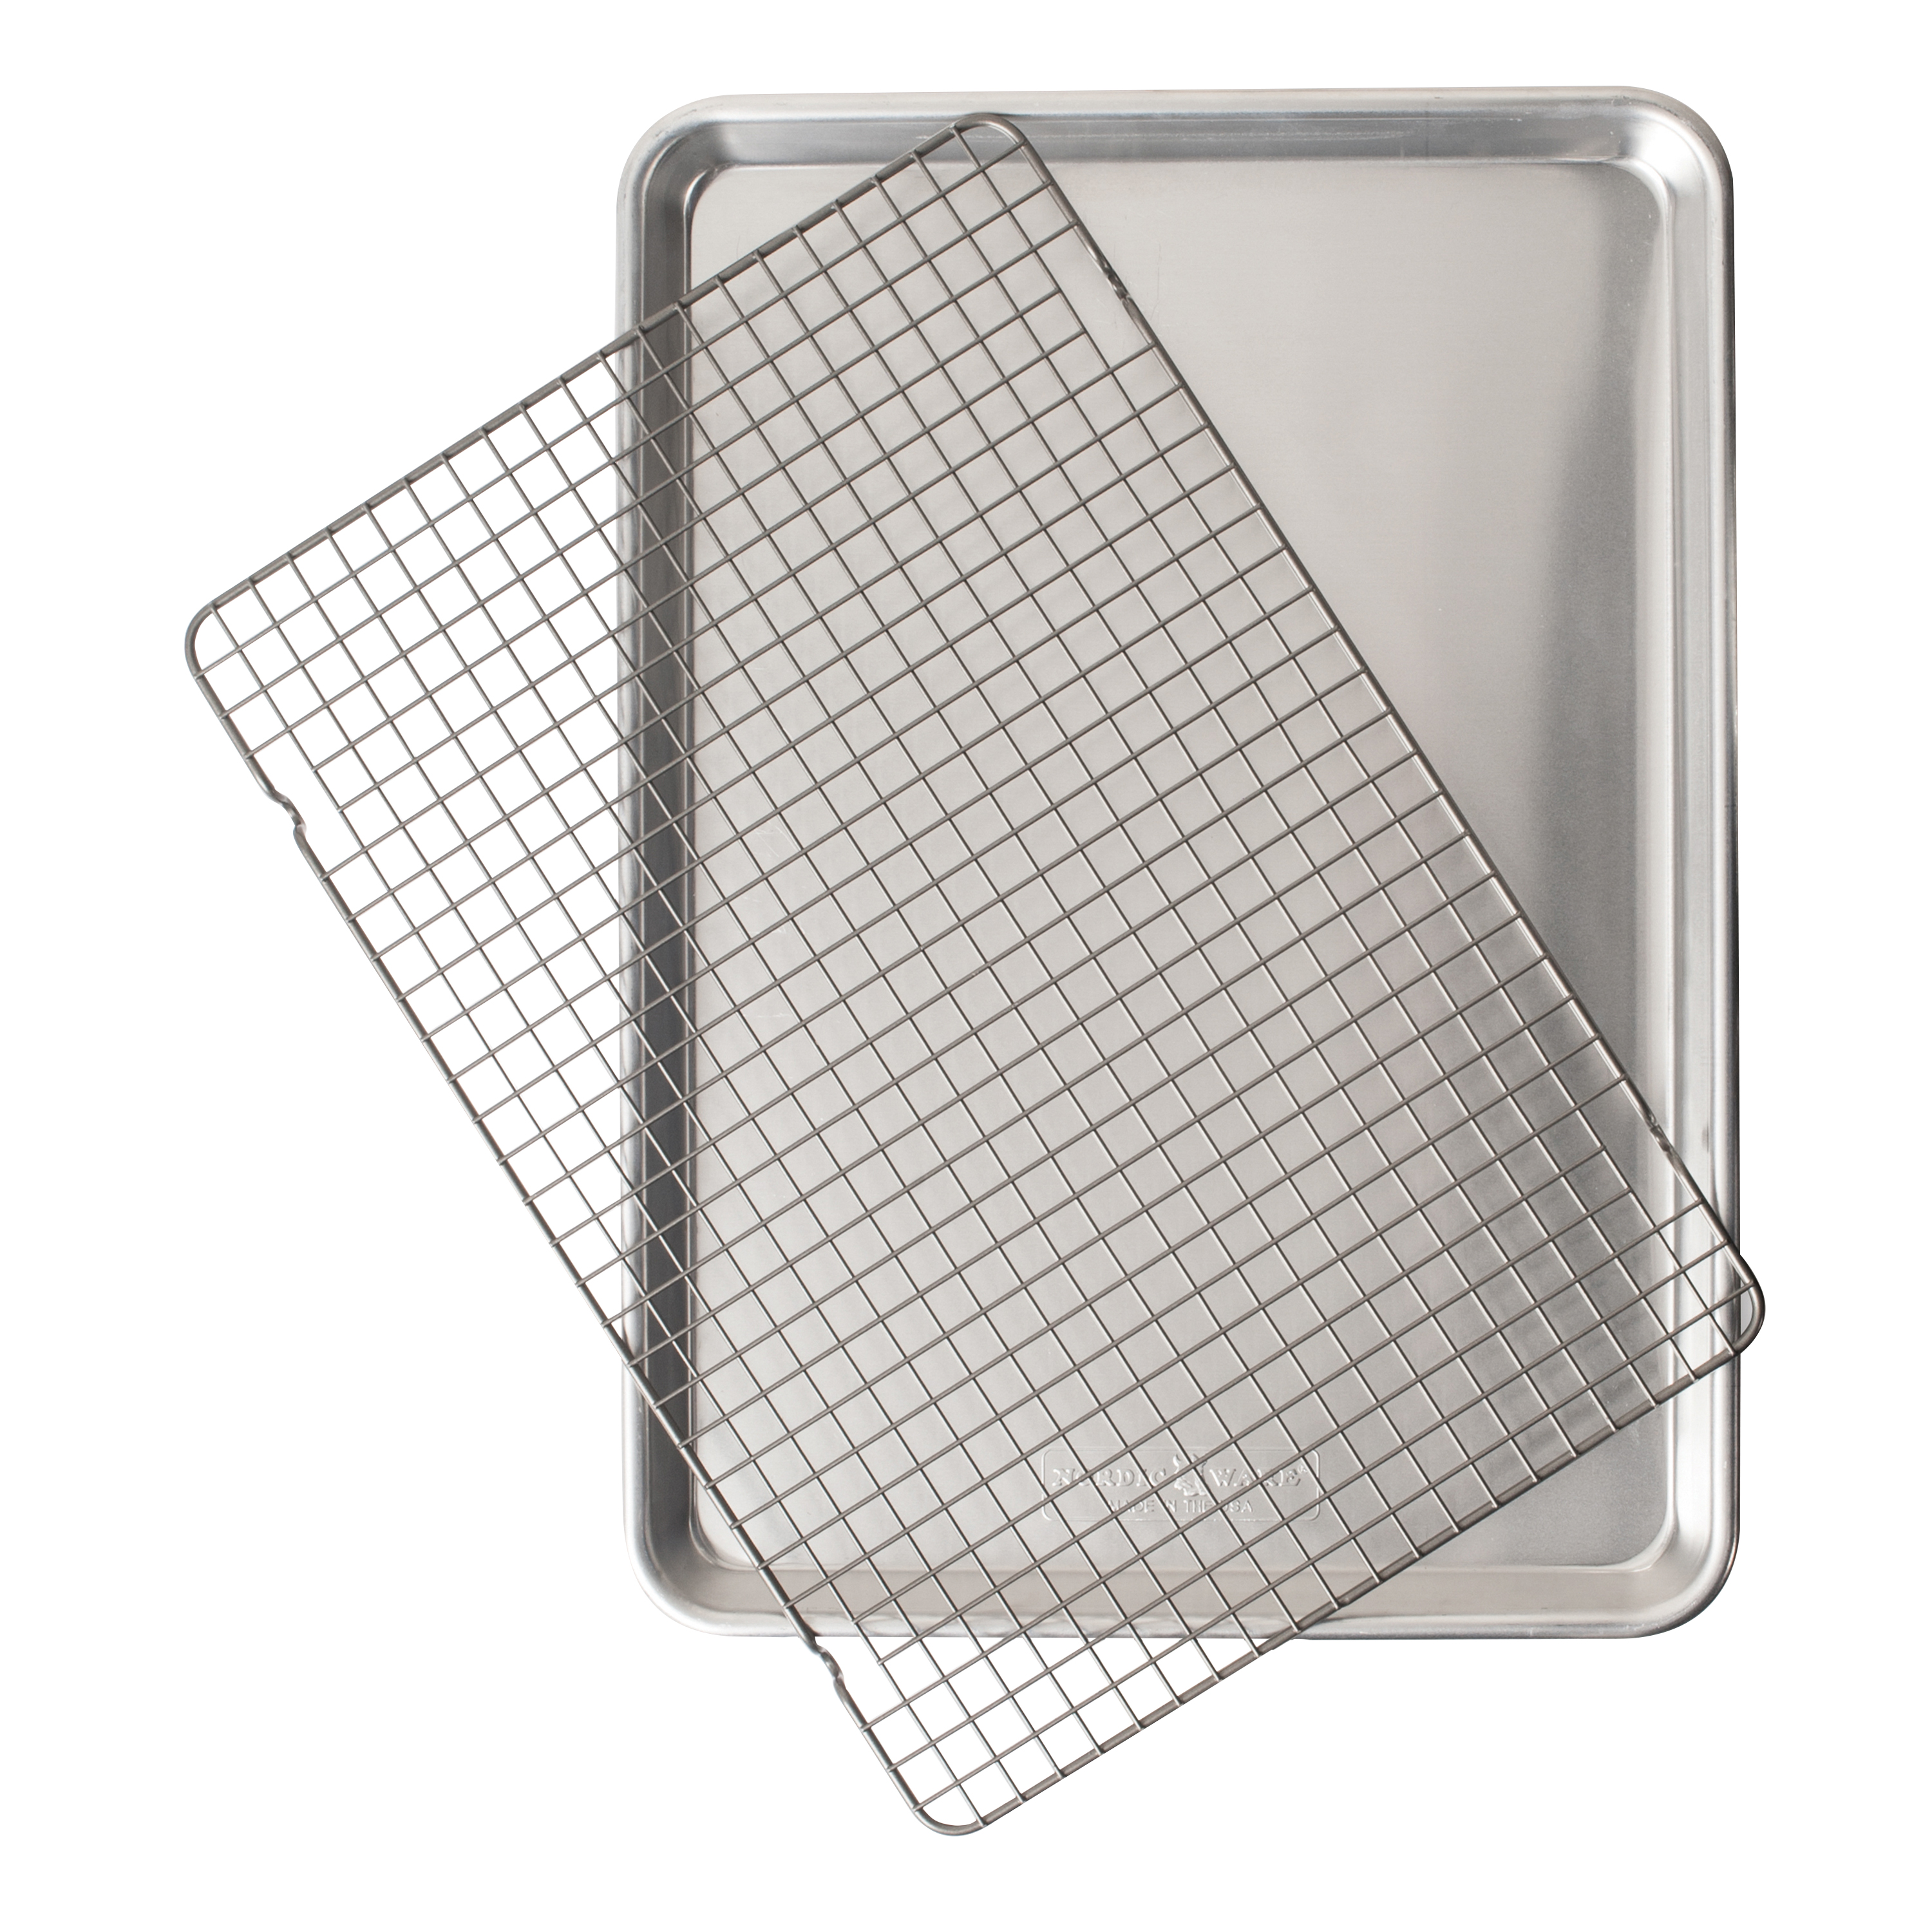 Nordic Ware Extra Large Oven Crisp Baking Tray - Silver